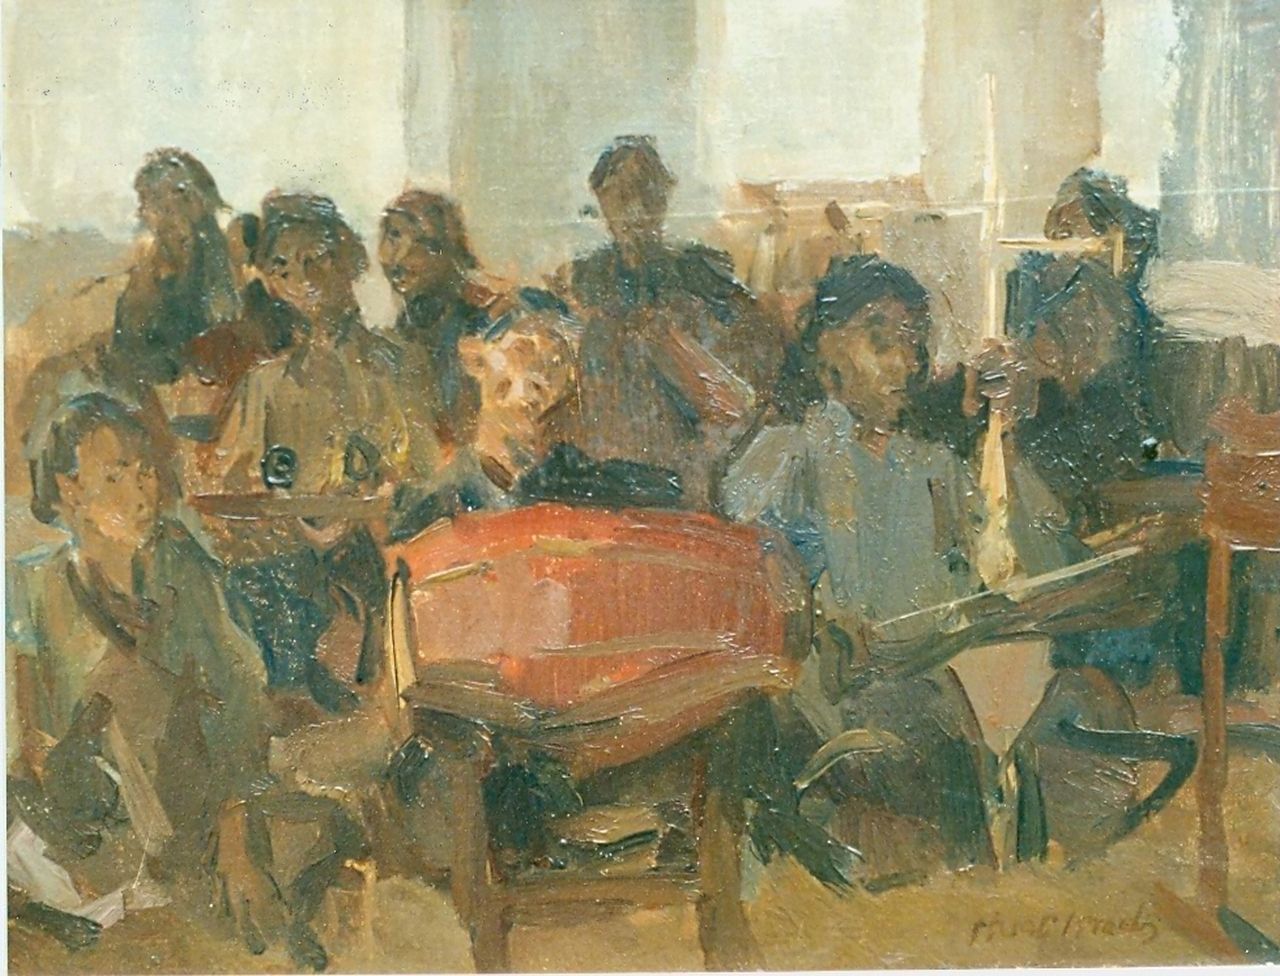 Israels I.L.  | 'Isaac' Lazarus Israels, Orchestra from Bali, oil on canvas 27.5 x 35.5 cm, signed l.r.